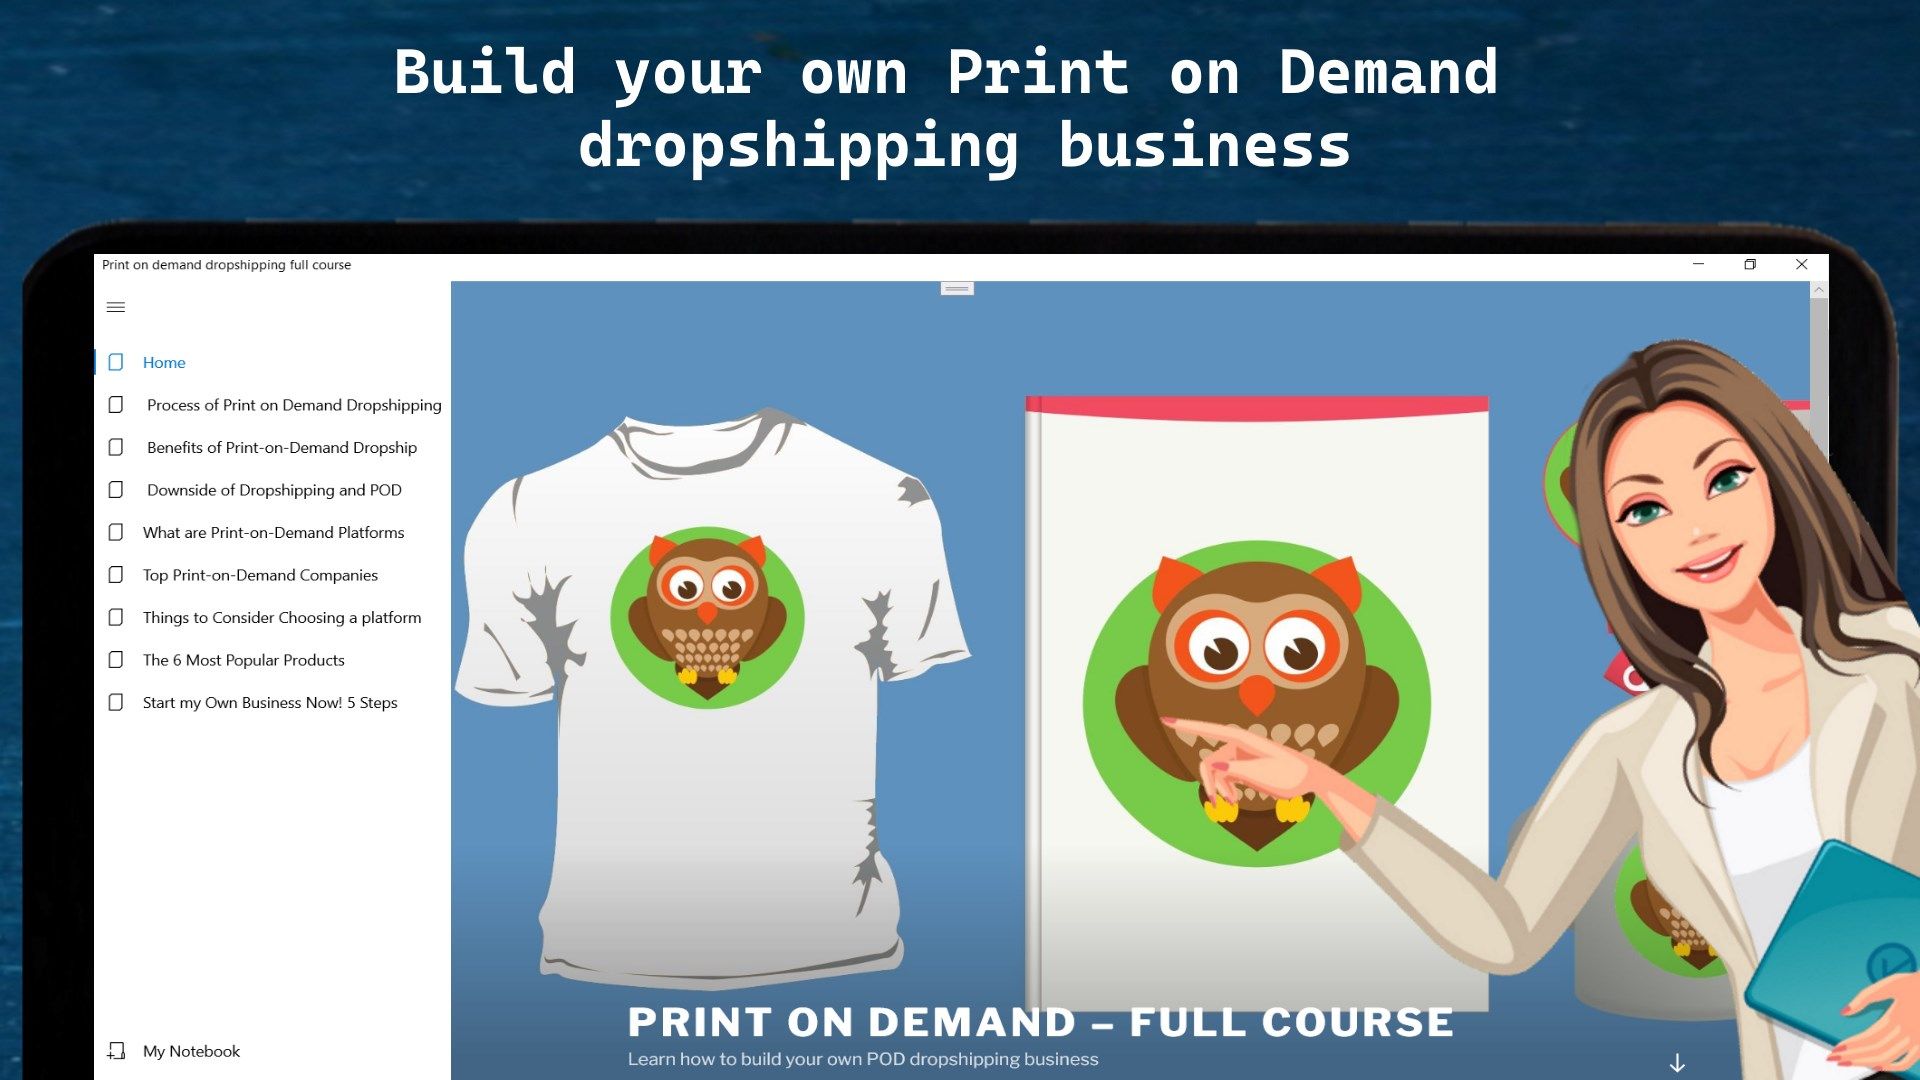 Print on demand dropshipping course